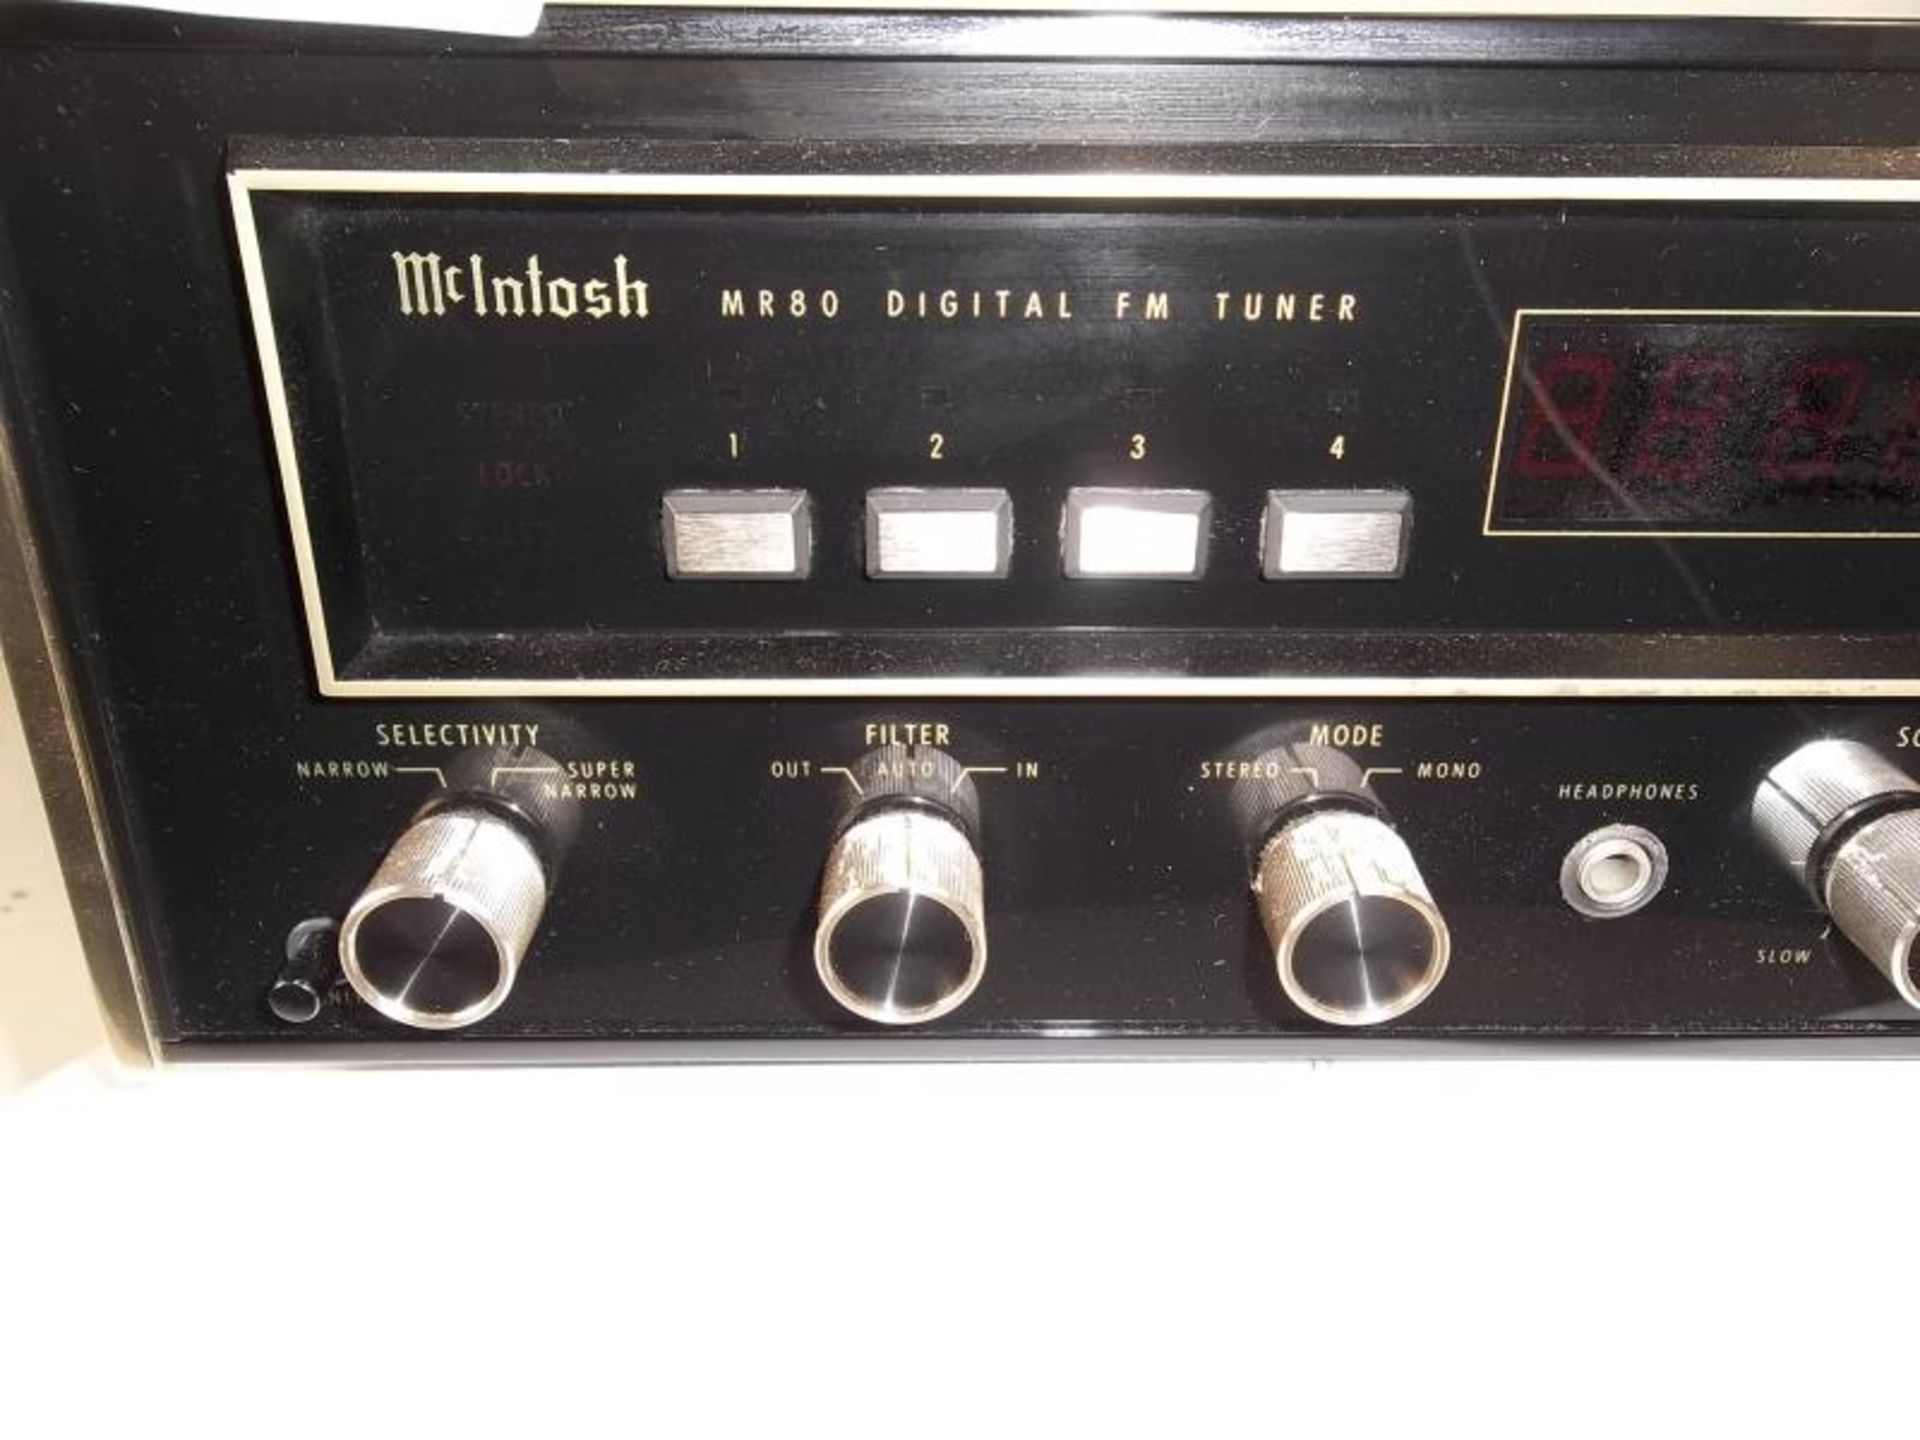 McIntosh MR 80, AM FM Tuner, in McIntosh cardboard box, with owner's manual, temp. instruction - Image 3 of 9